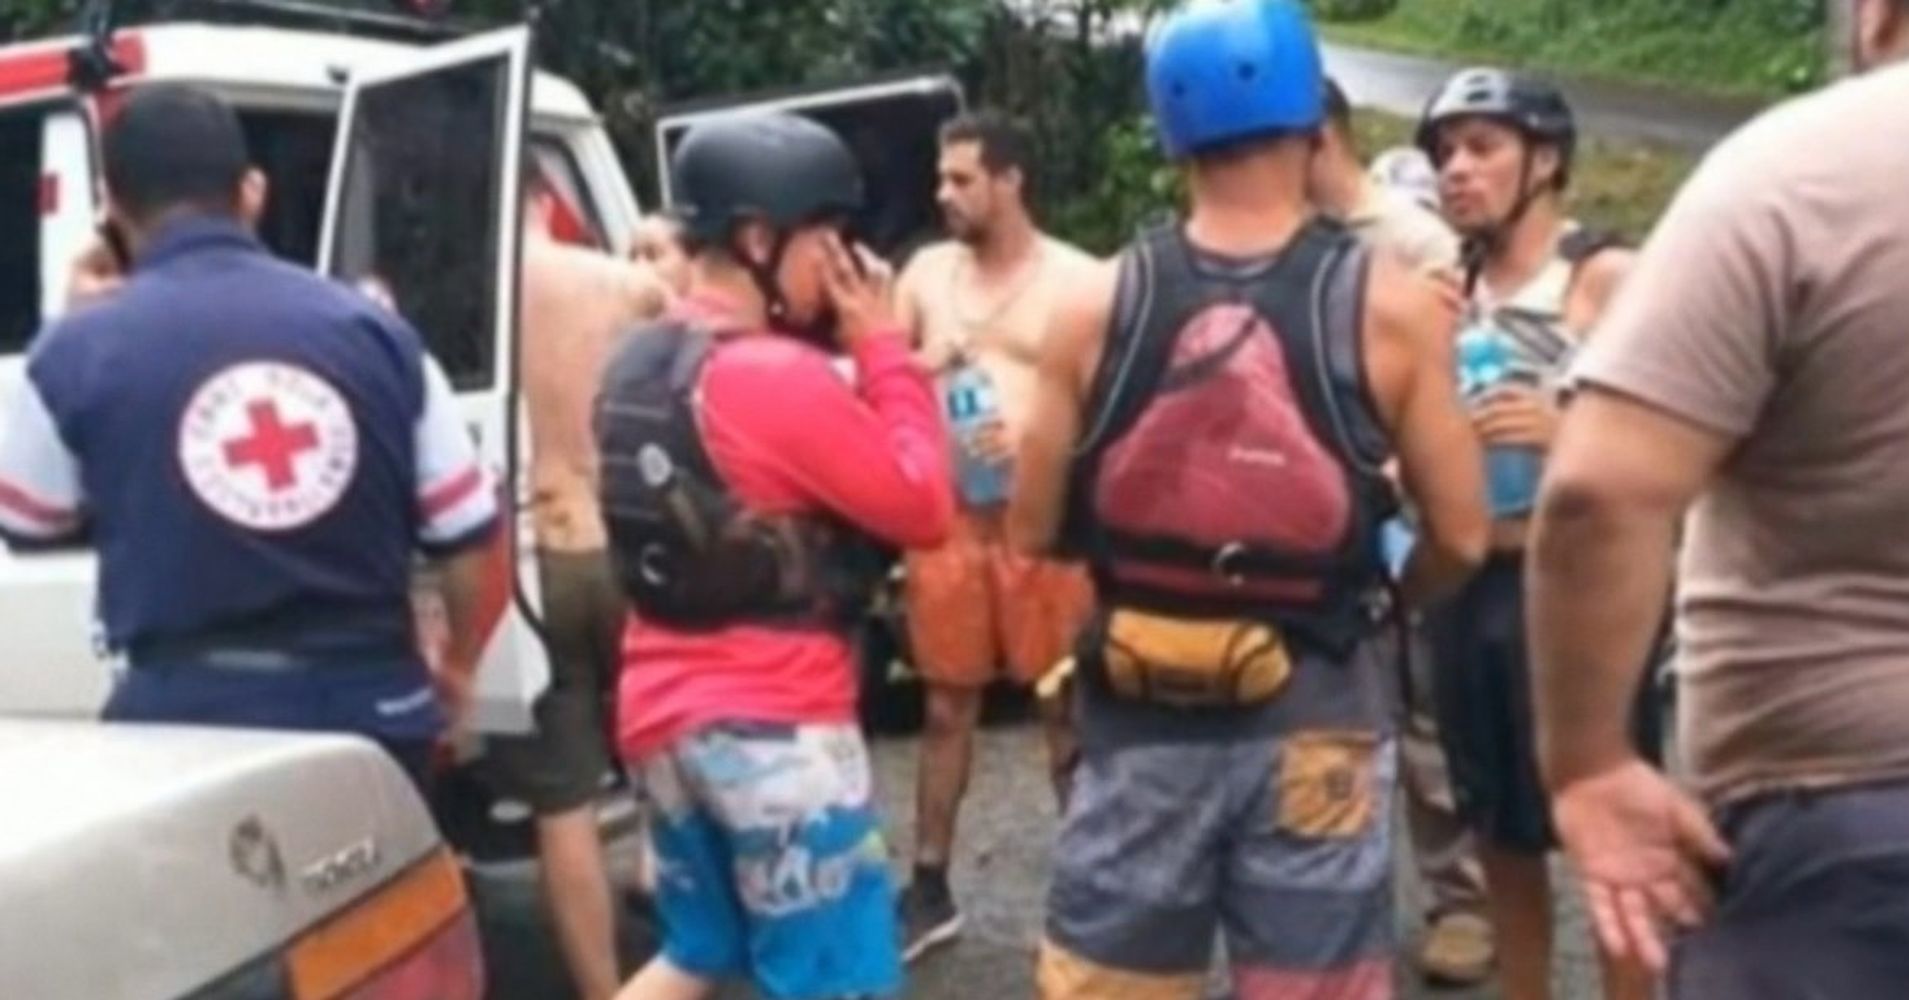 Costa Rica Rafting Accident Leaves 5 Dead Including 4 American Bachelor Party Attendees Huffpost 